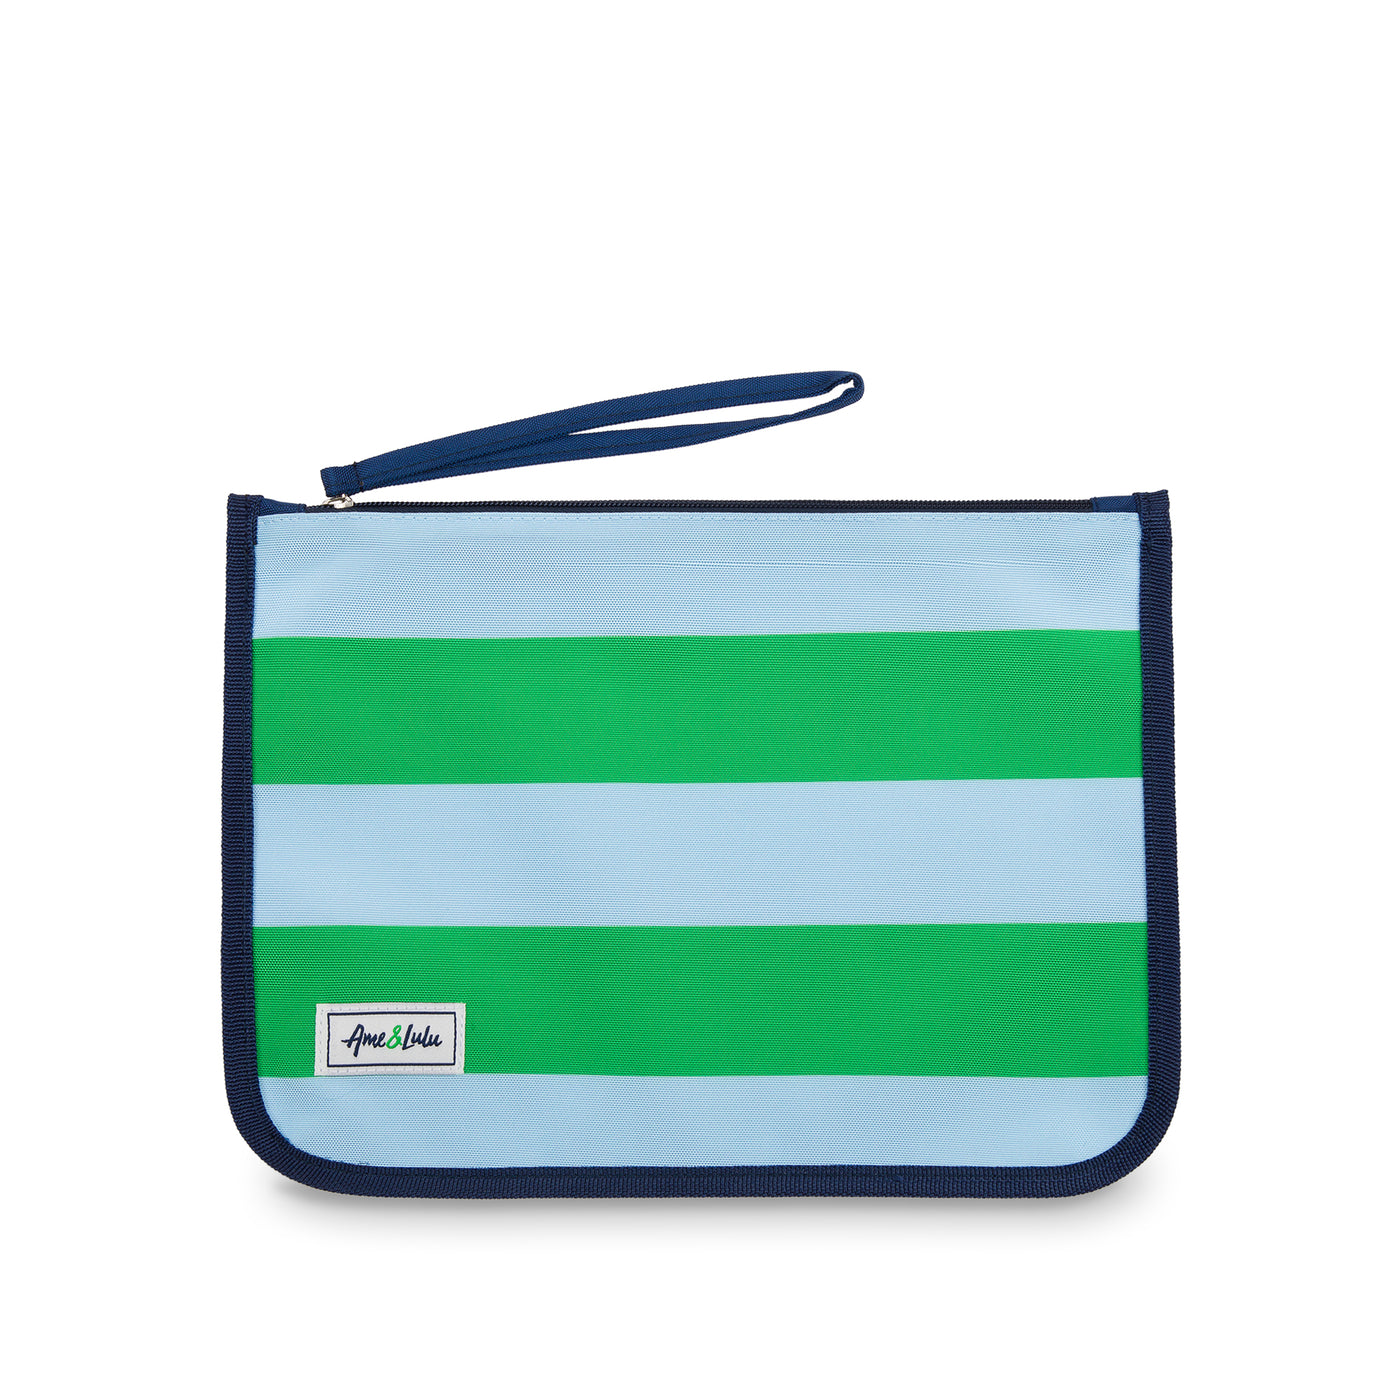 light blue and green striped nylon zip pouch with wrist strap